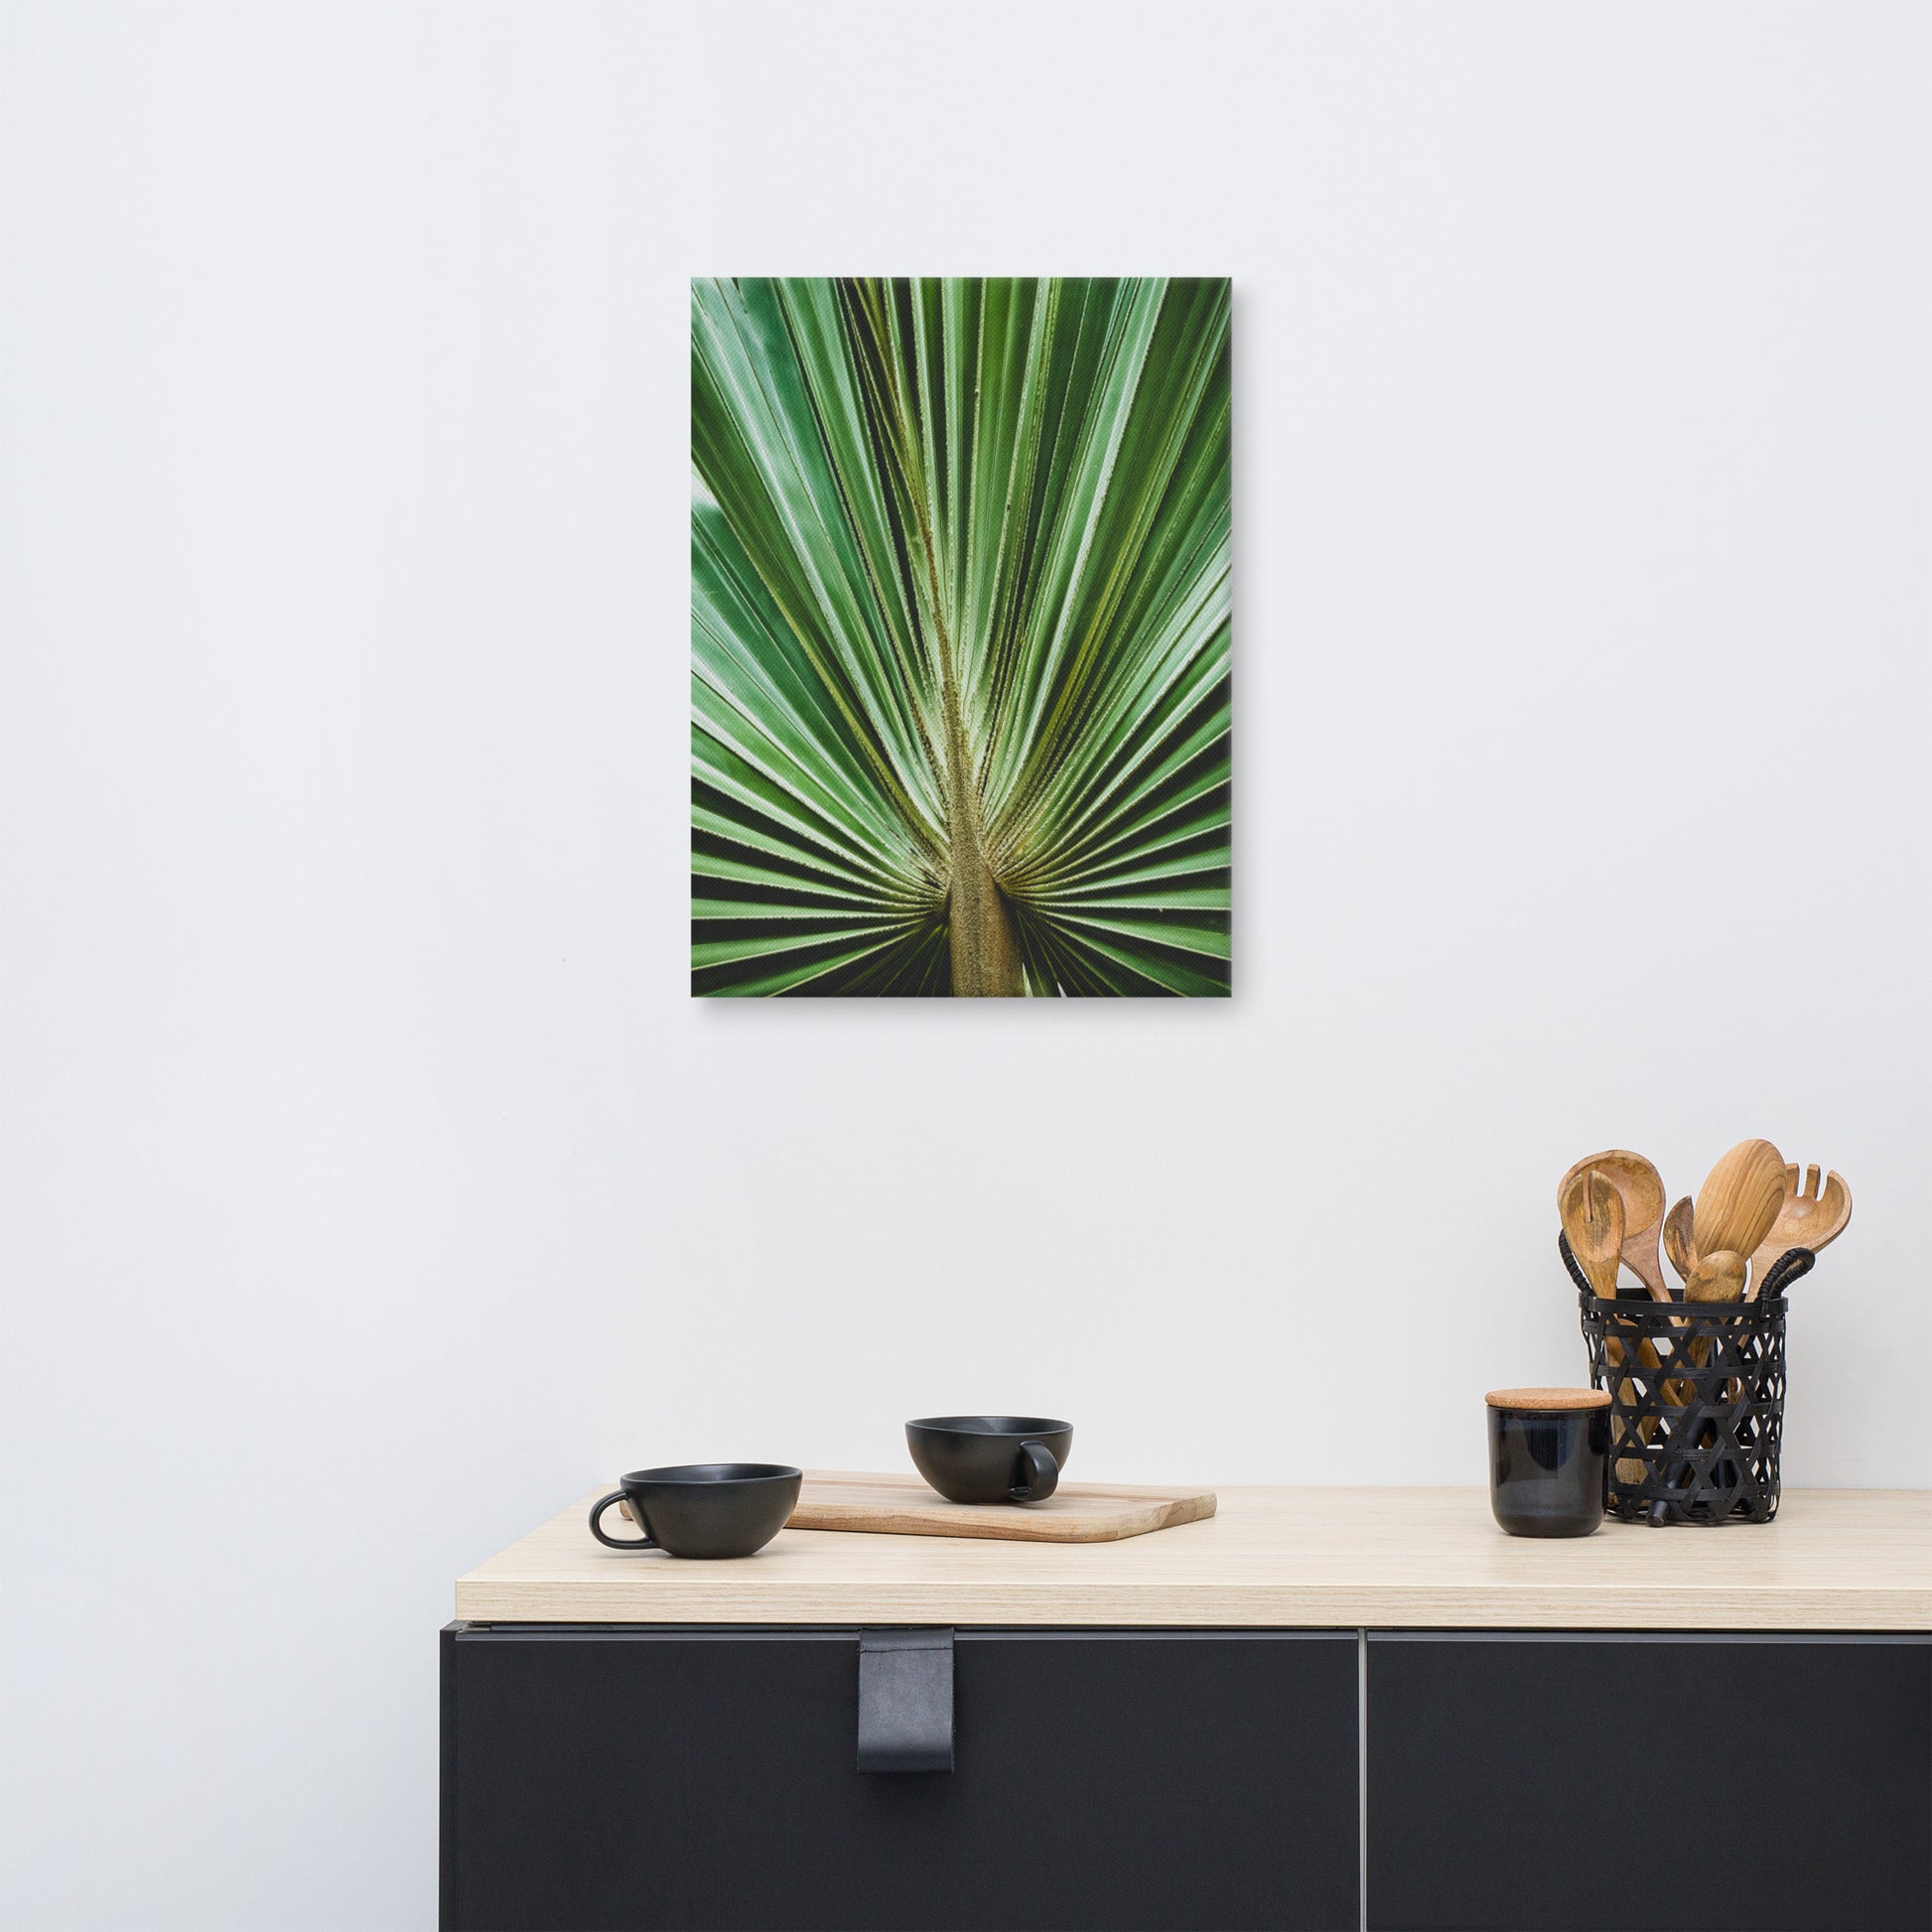 Elegant Wall Art For Dining Room: Aged and Colorized Wide Palm Leaves 2 - Botanical / Plants Nature Photograph Canvas Wall Art Print - Artwork